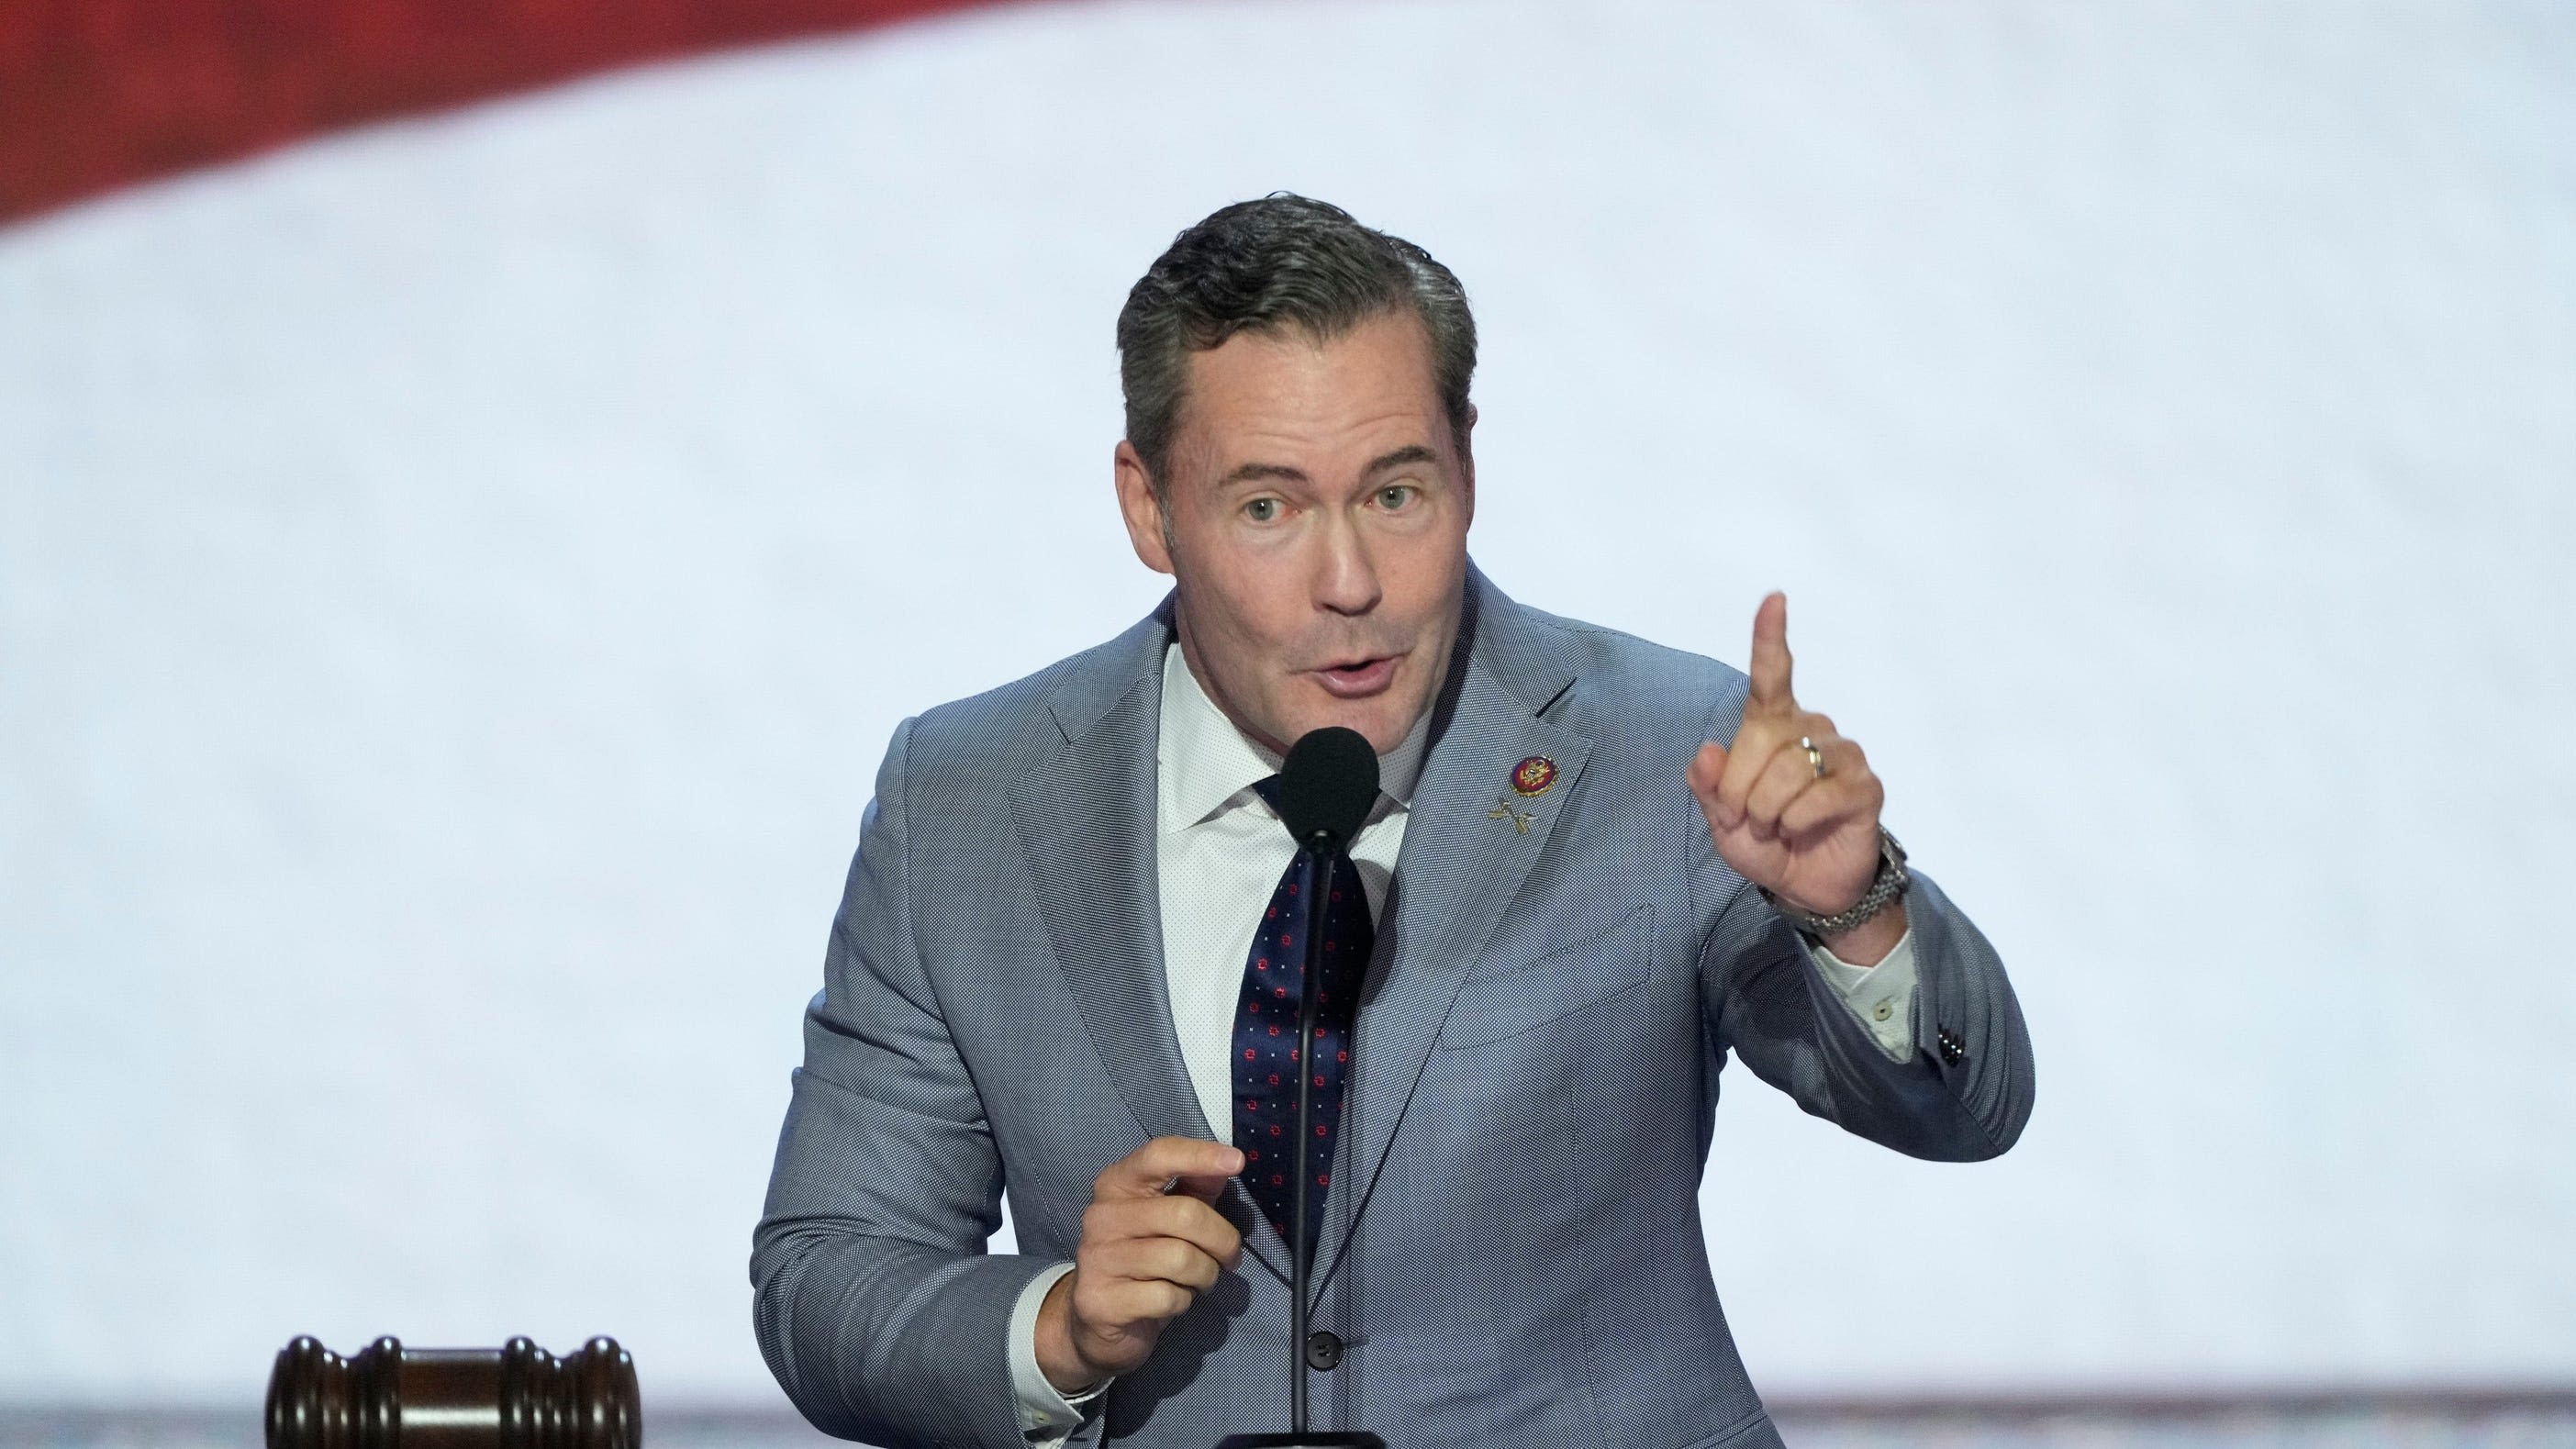 Watch US Rep. Michael Waltz's speech at the Republican National Convention